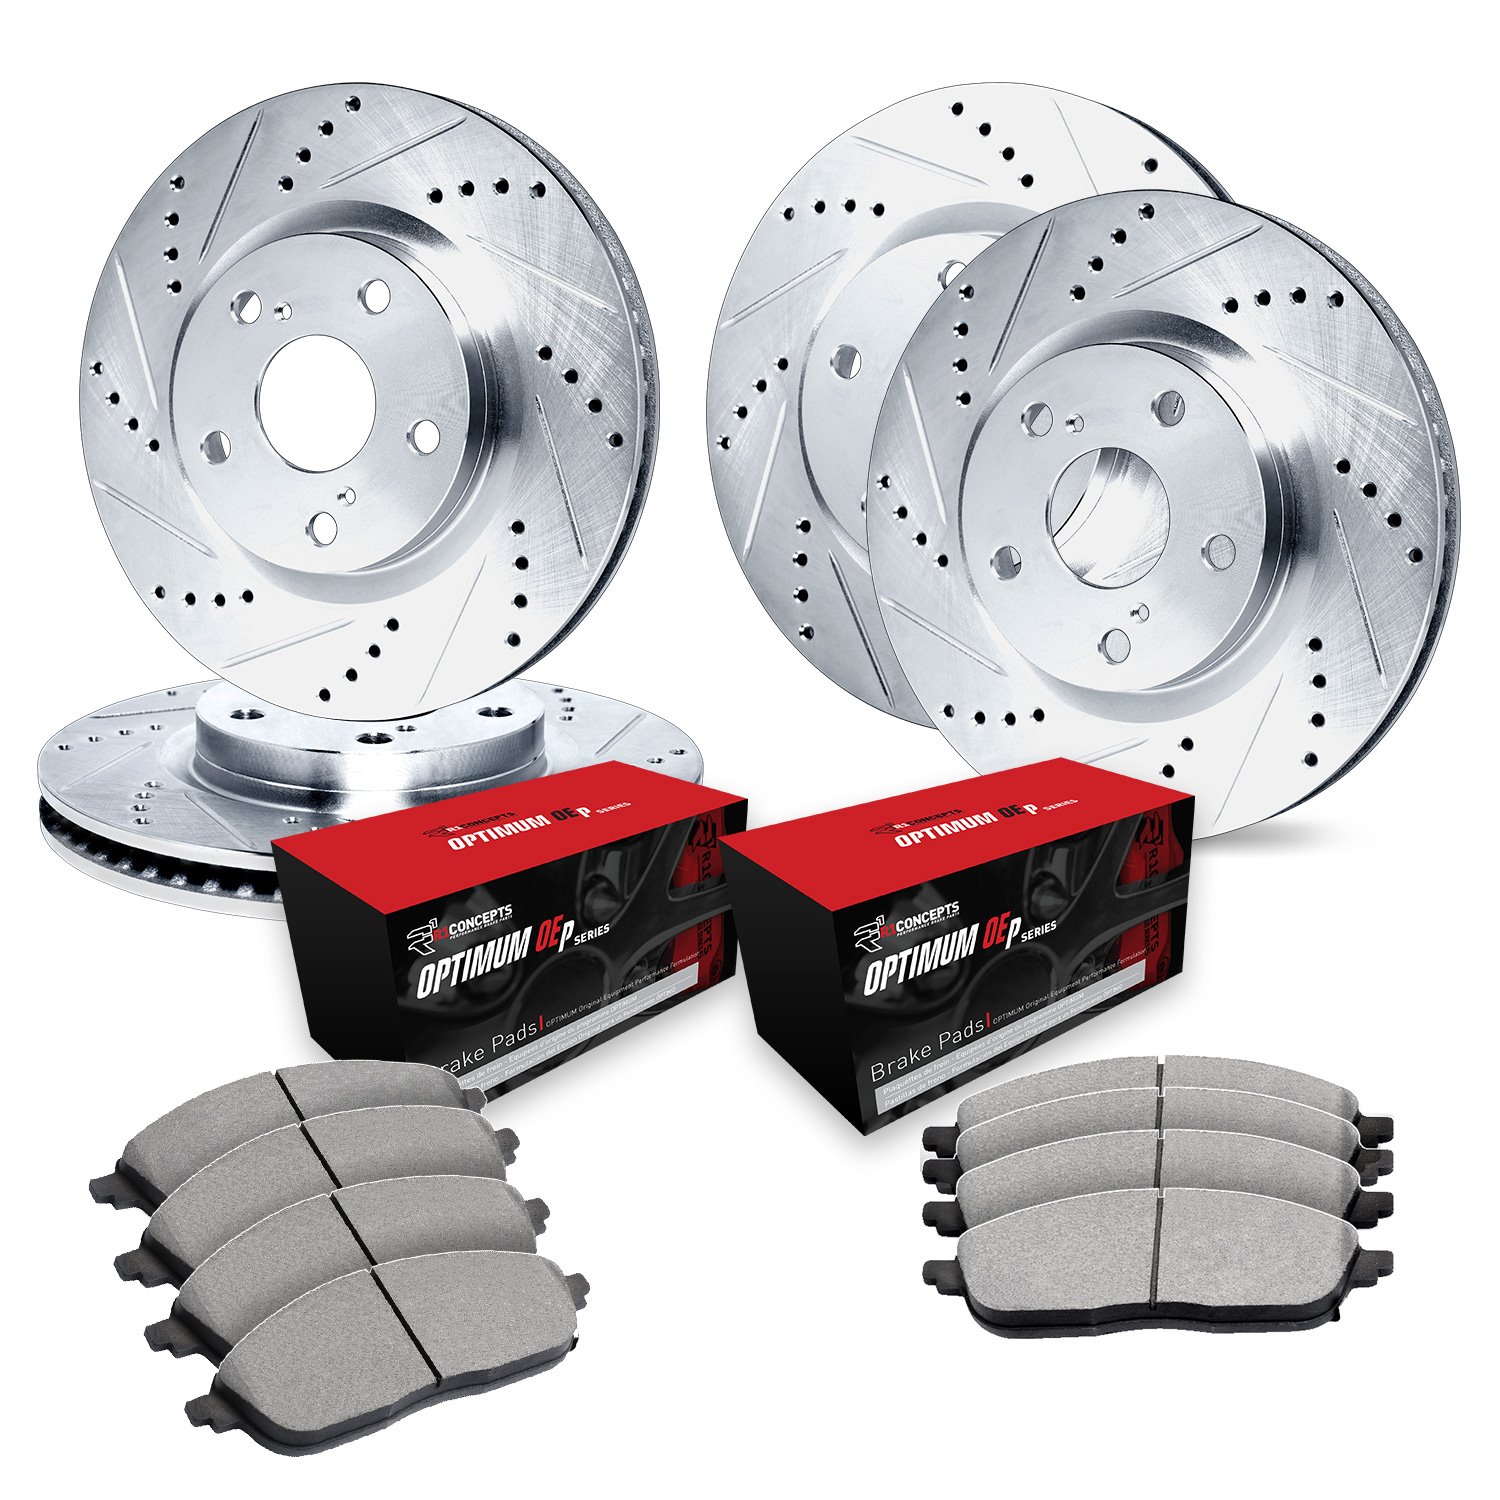 E-Line Drilled & Slotted Silver Brake Rotor Set w/Optimum OE Pads, 2008-2008 Audi/Porsche/Volkswagen, Position: Front & Rear